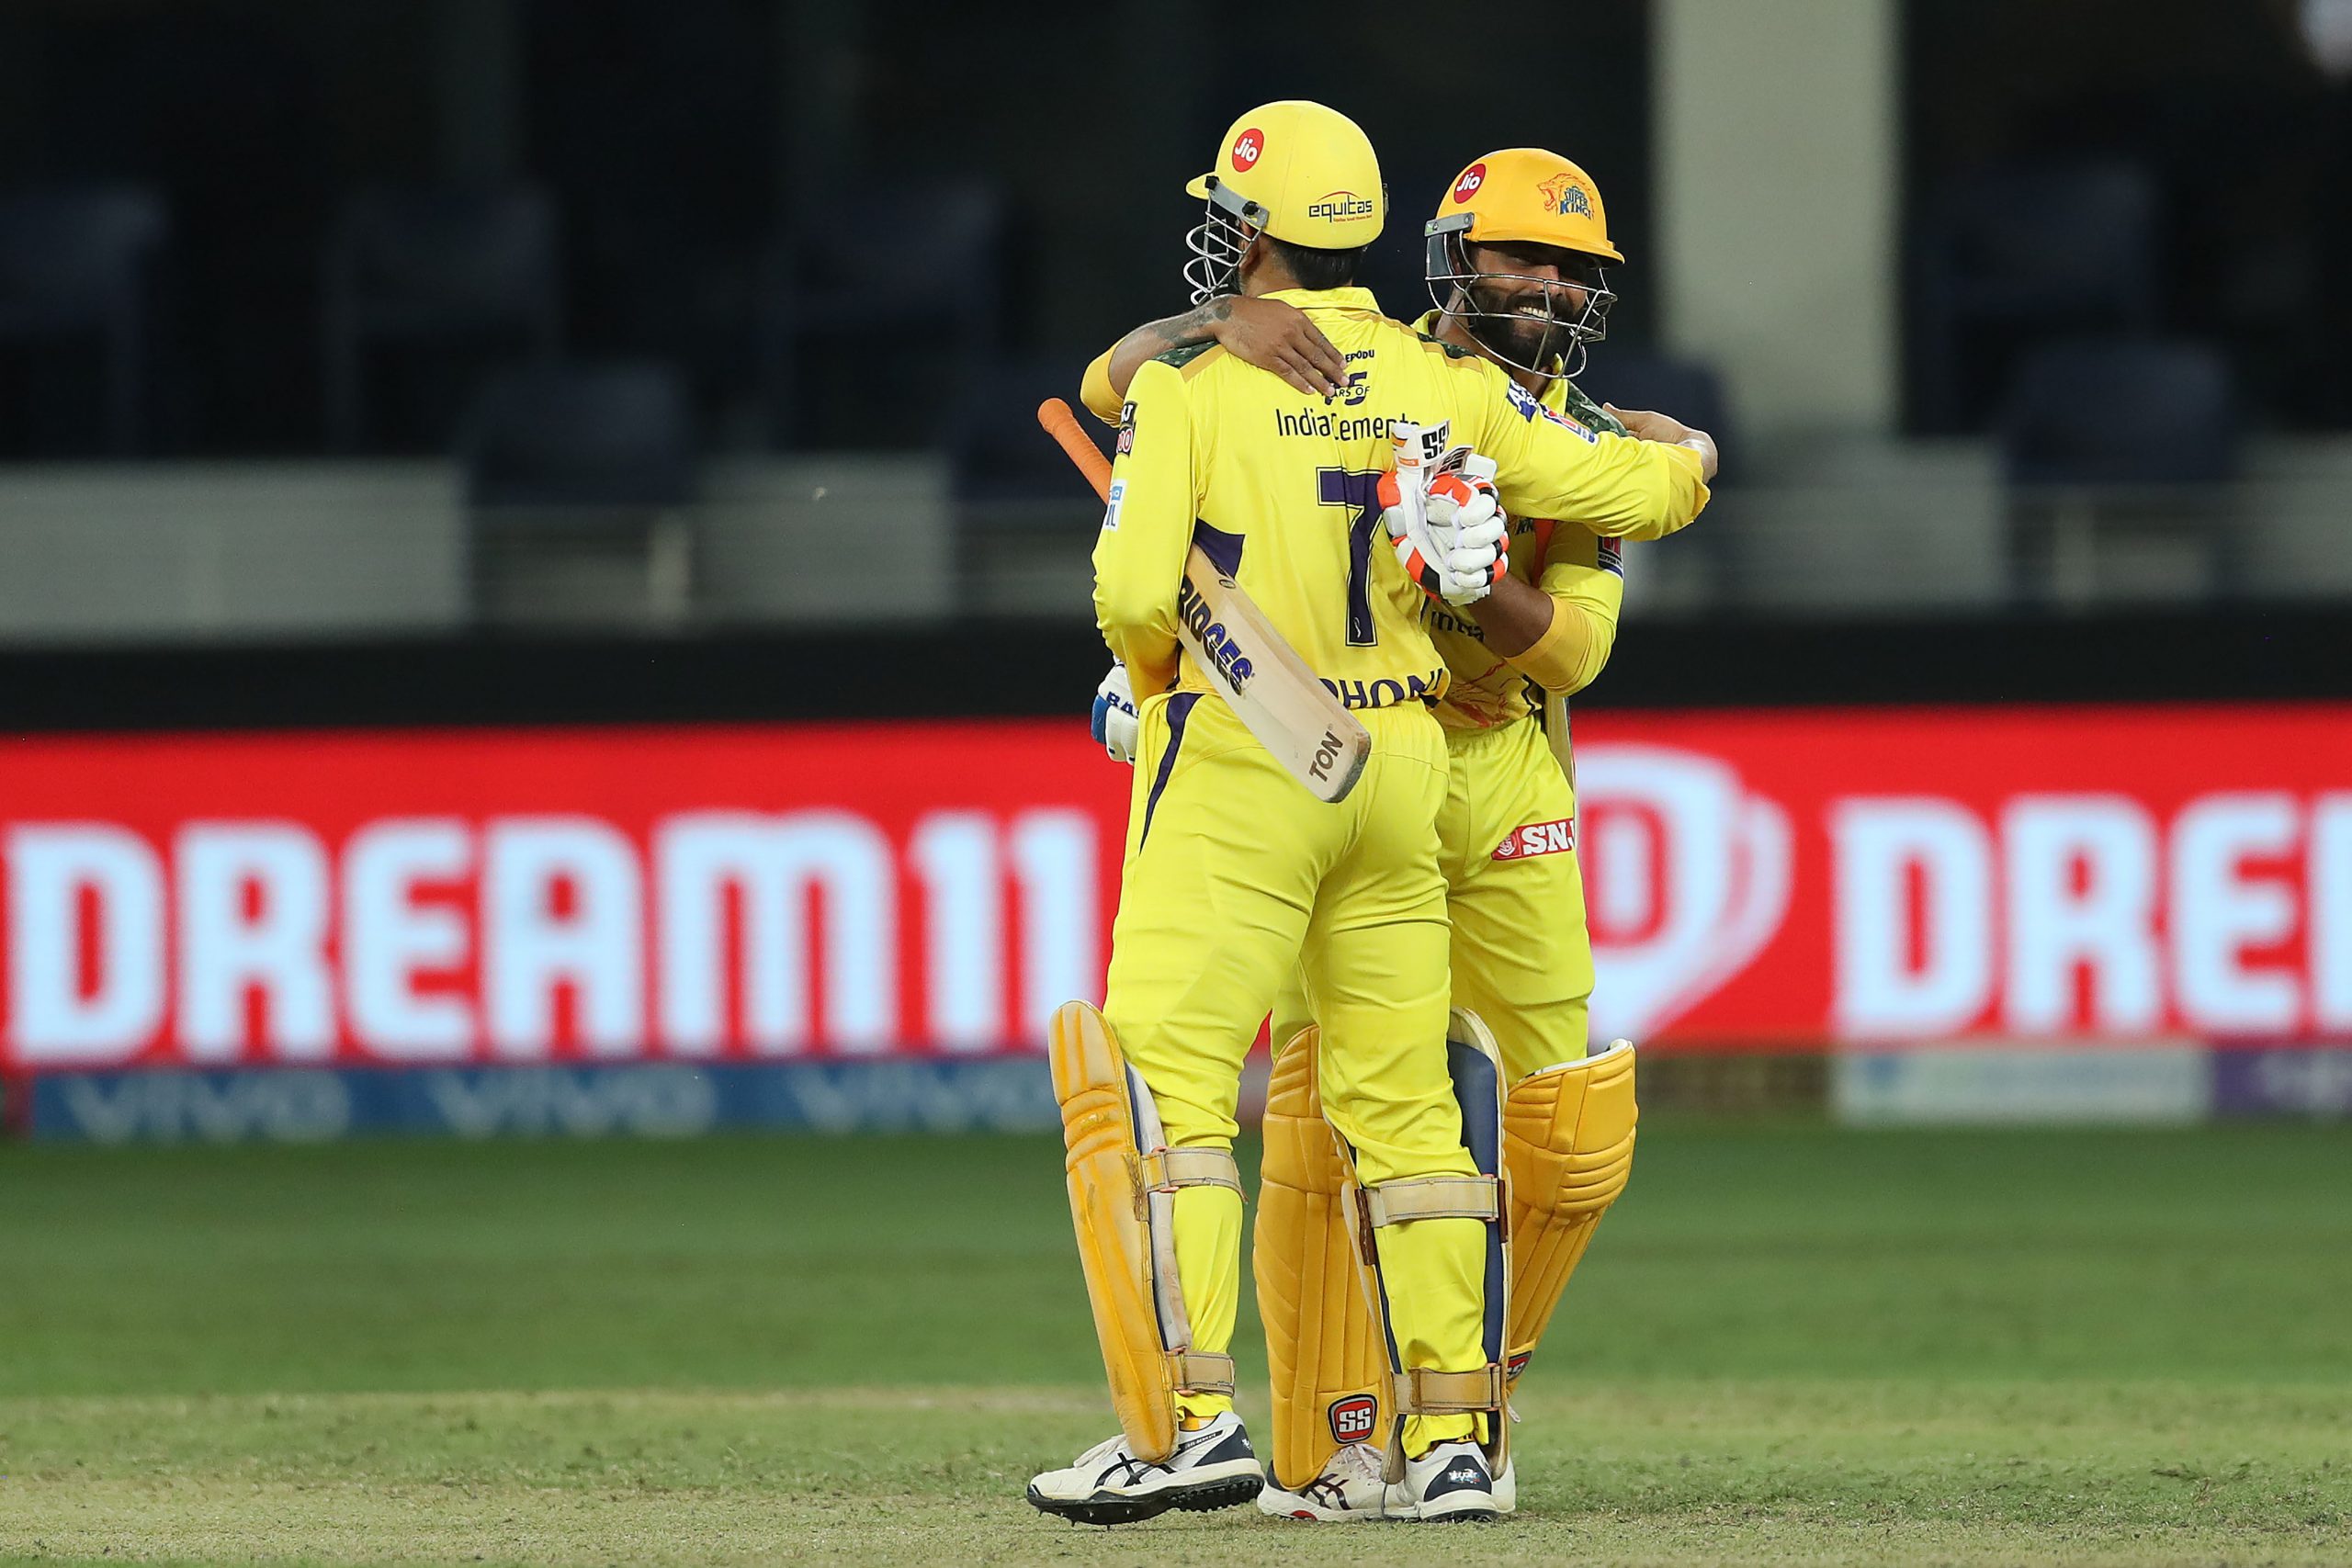 With Dhoni as ‘go to man’, Jadeja not worried to take on as CSK skipper